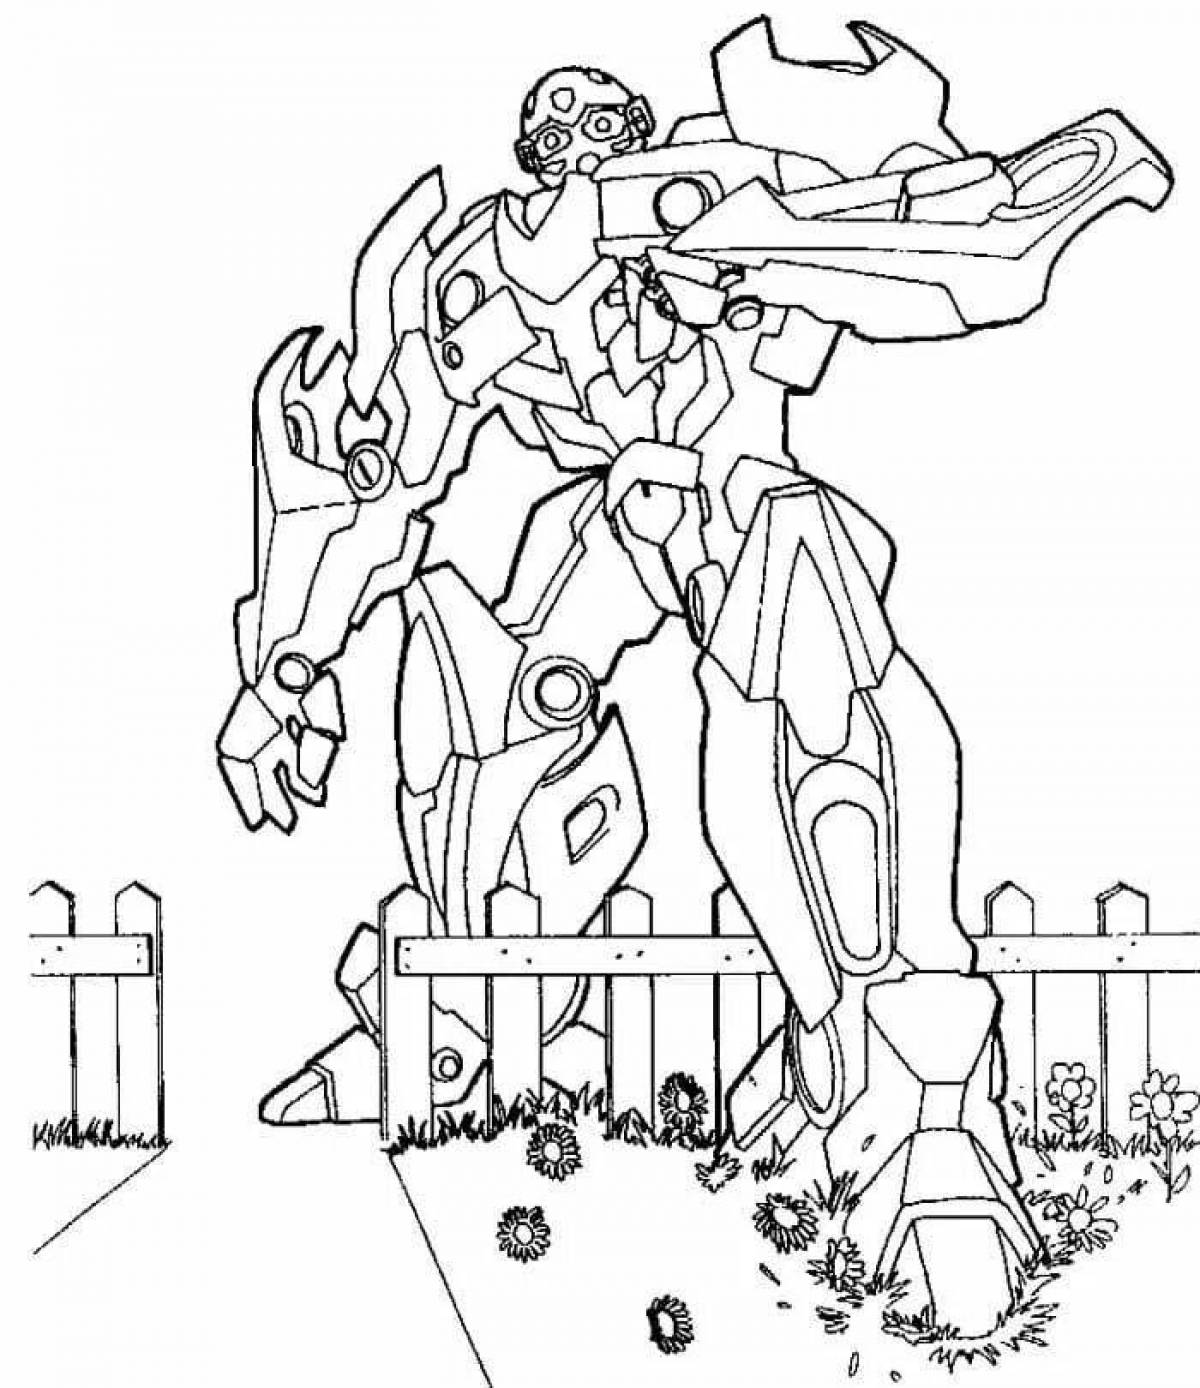 Attractive bumblebee robot coloring page